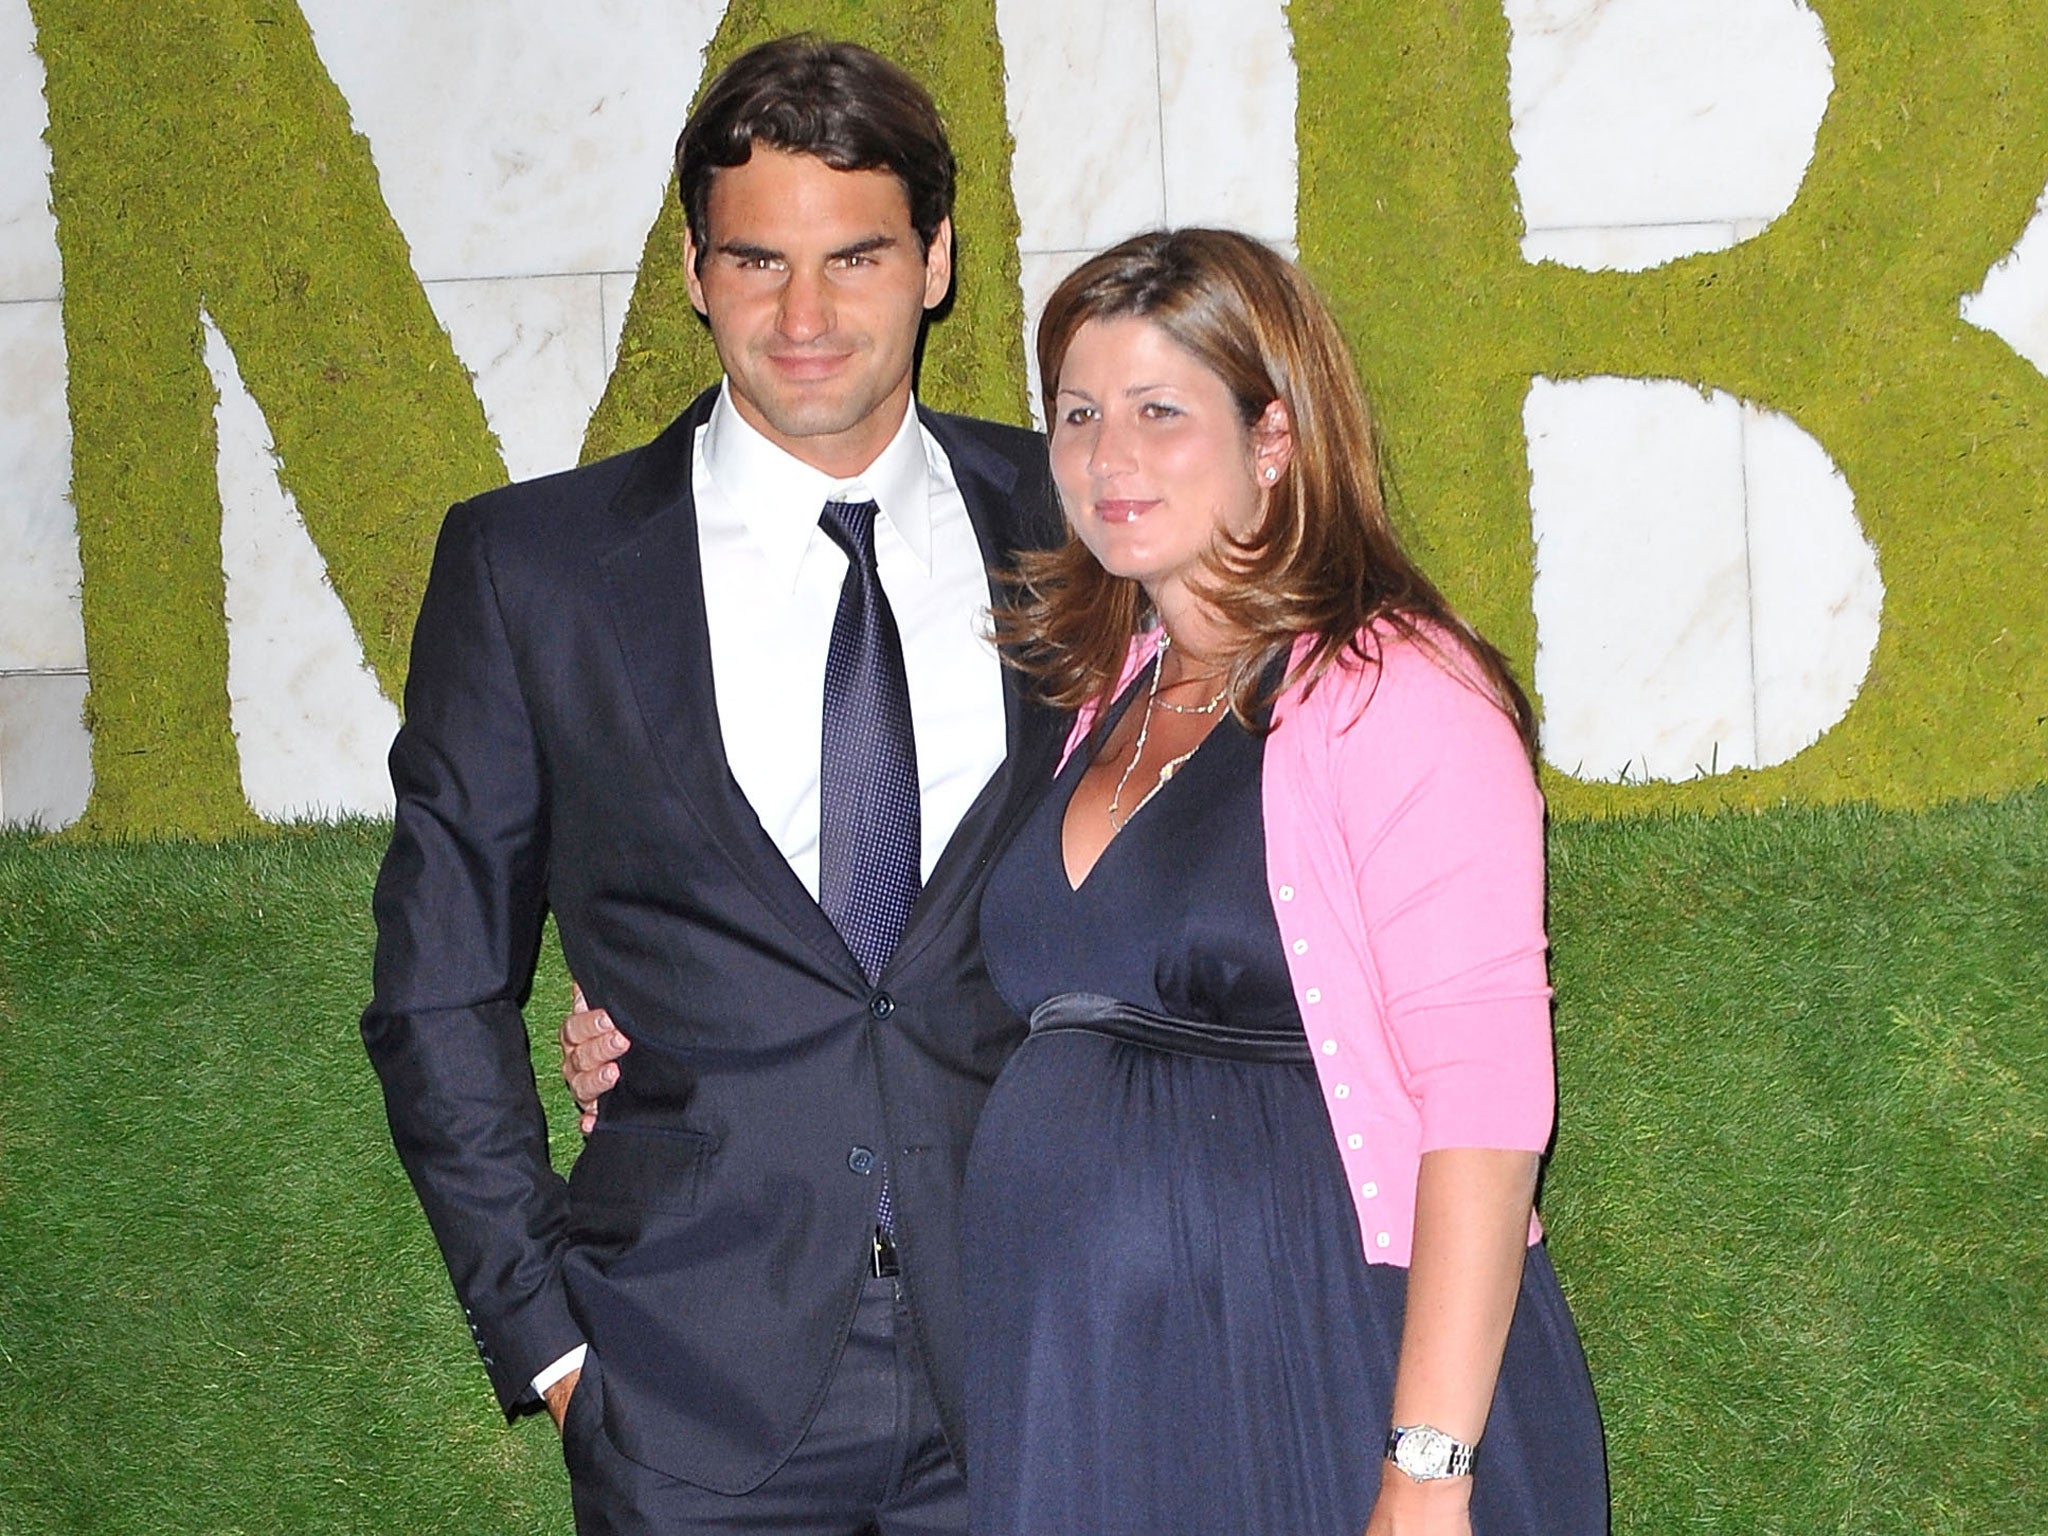 Roger Federer's wife Mirka gives birth to second set of twins | The Independent2048 x 1536